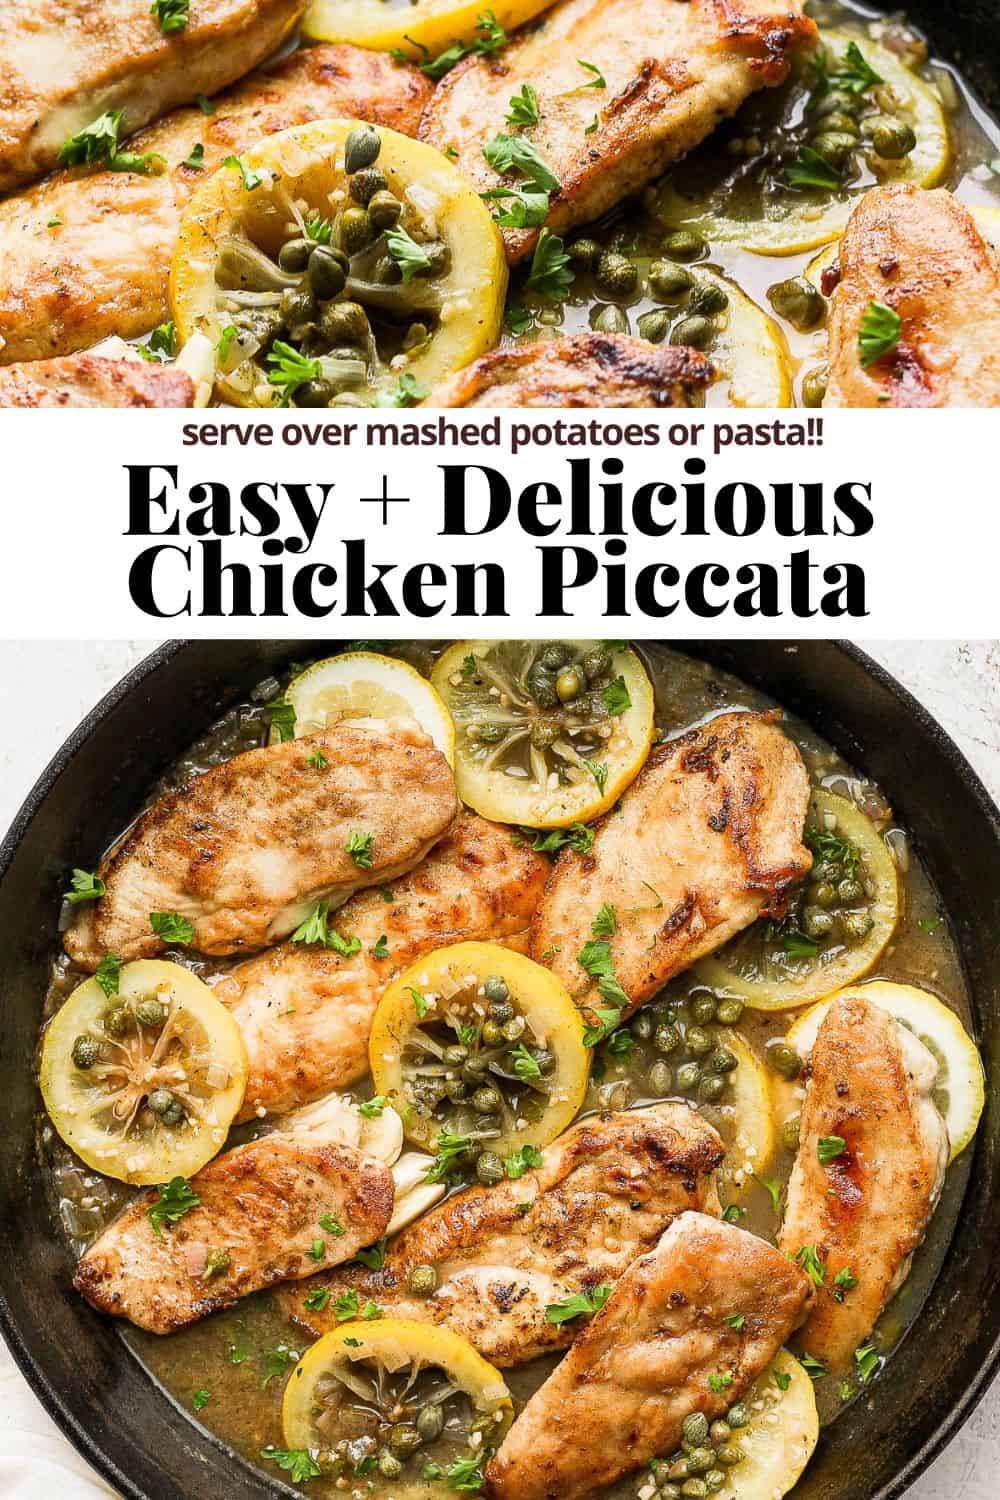 Pinterest image showing a close up of chicken piccata, the recipe title, and a cast iron skillet with chicken piccata.